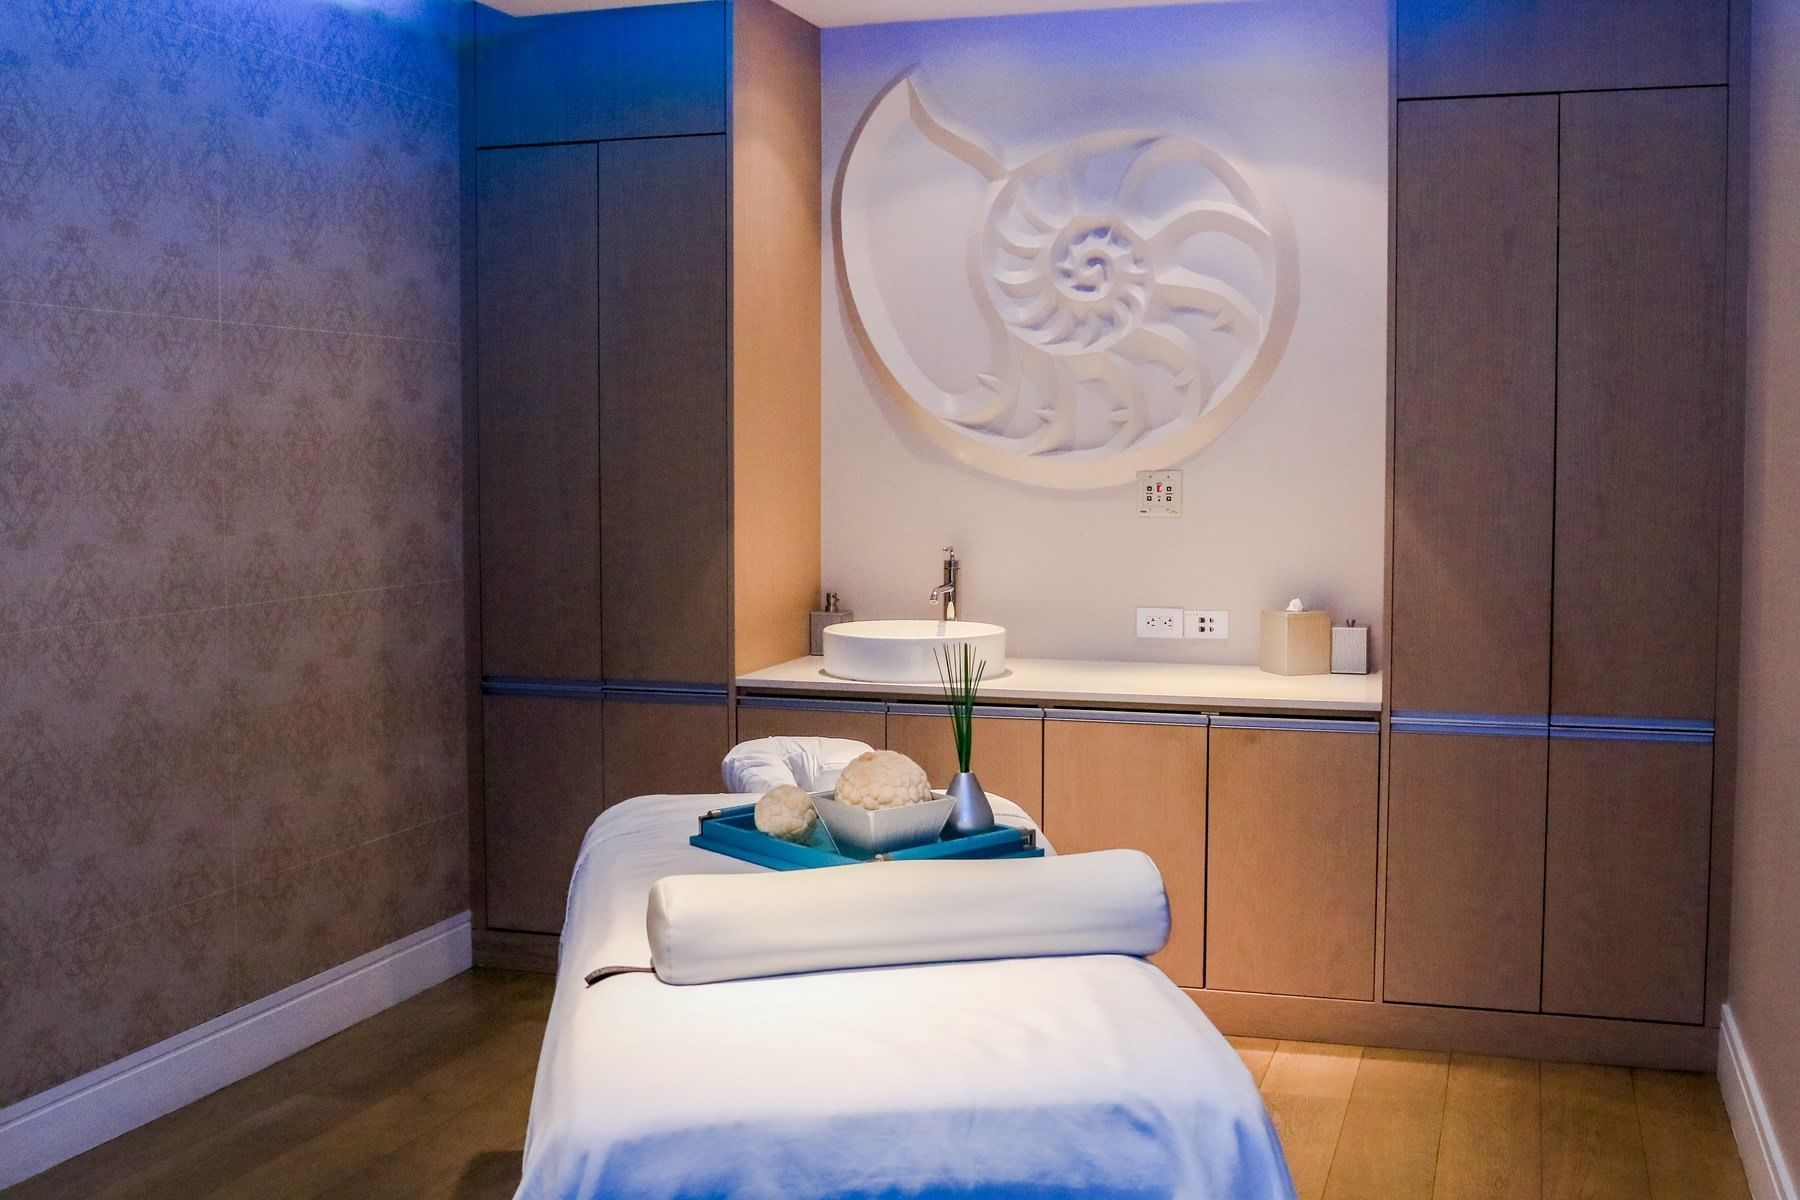 Massage bed & amenities in The Spa at The Diplomat Resort